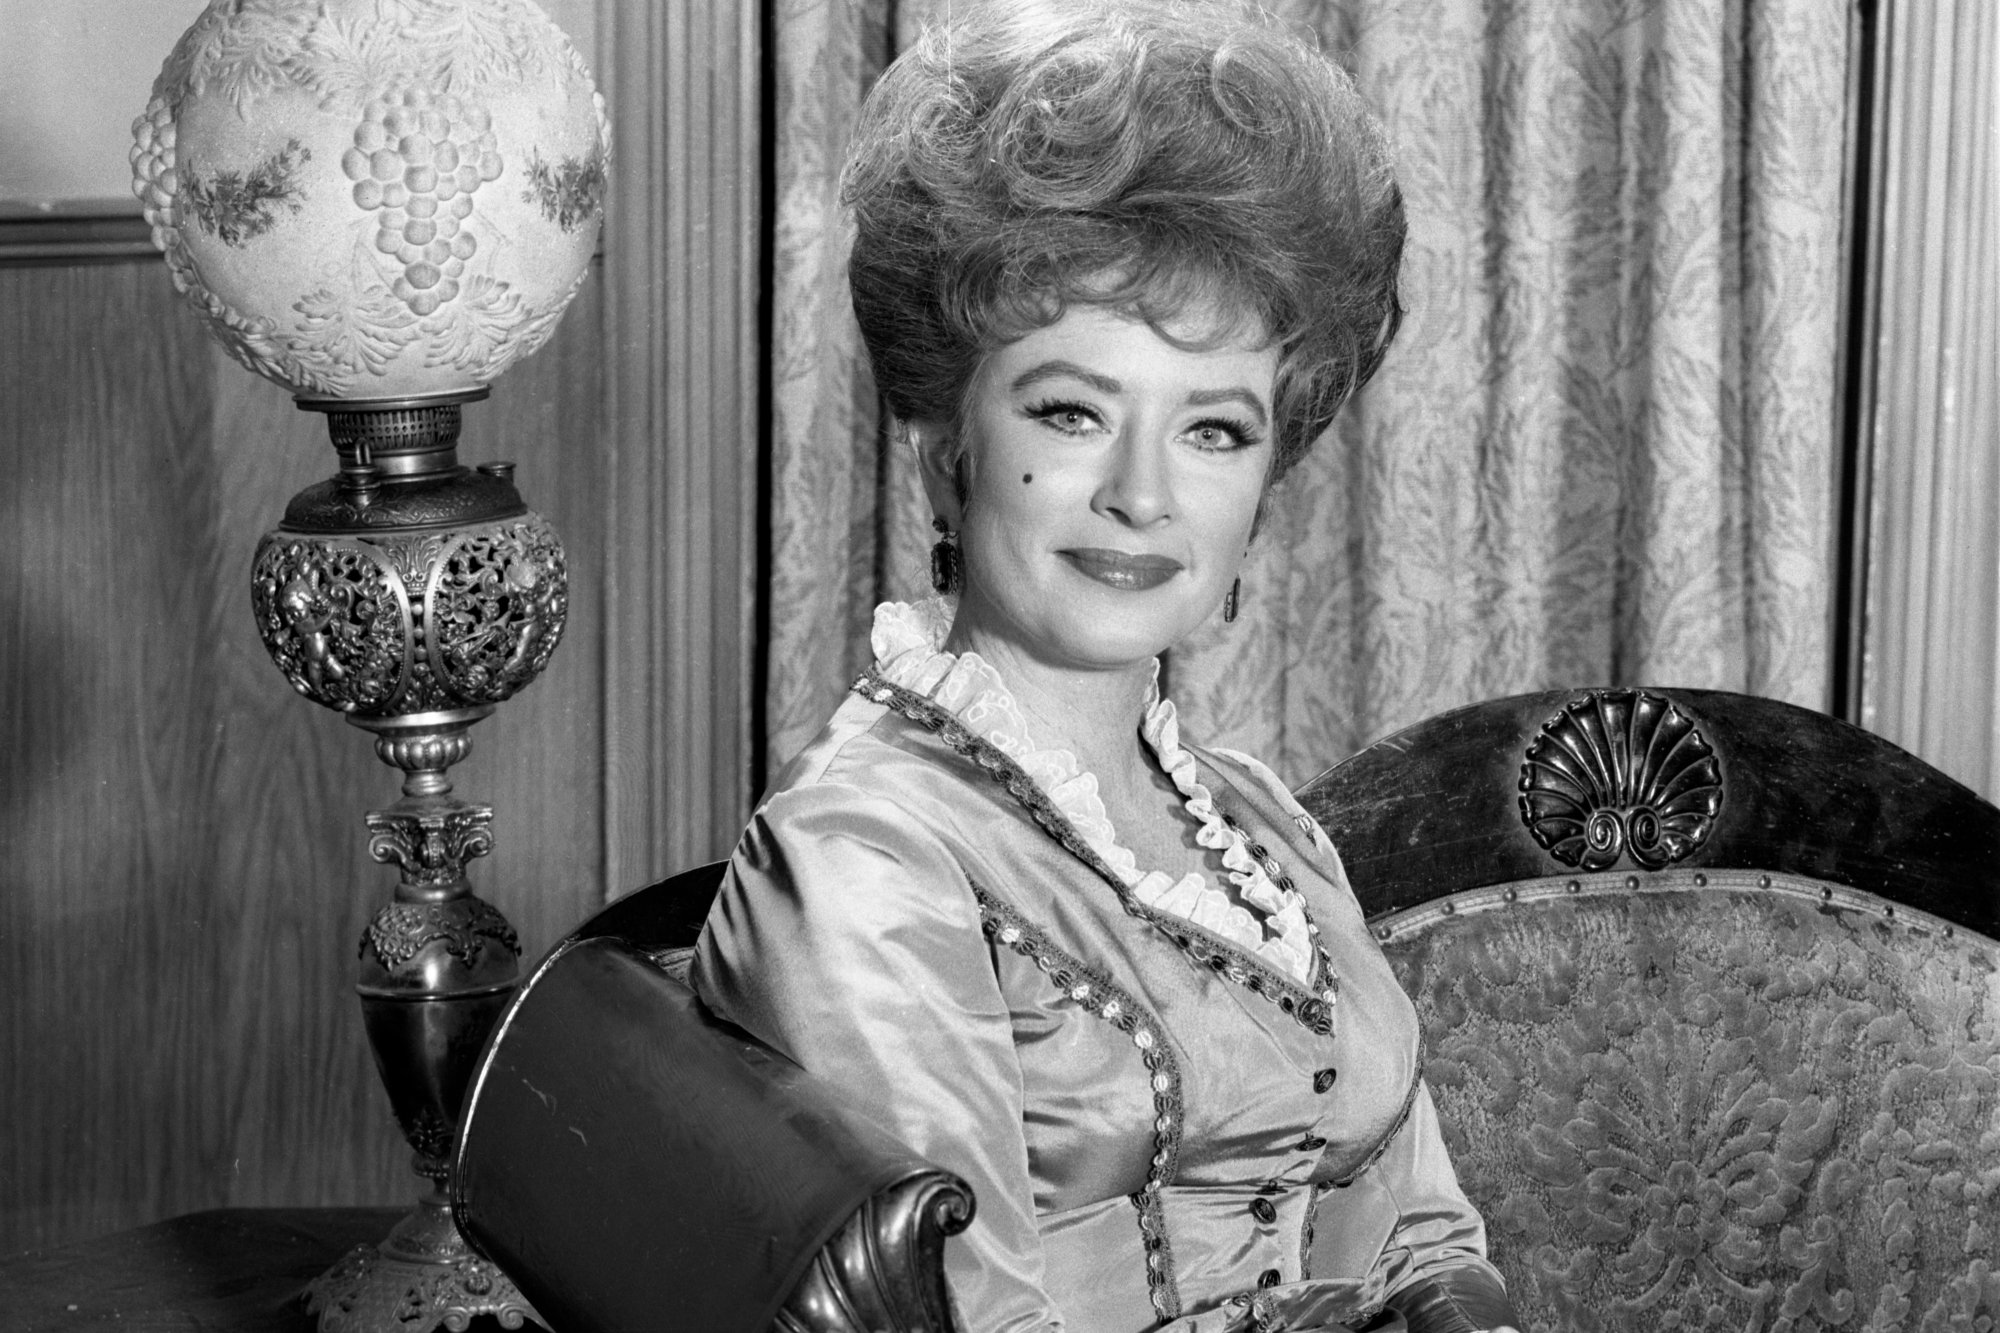 'Gunsmoke' Amanda Blake as Miss Kitty Russell in a black-and-white picture sitting on a couch